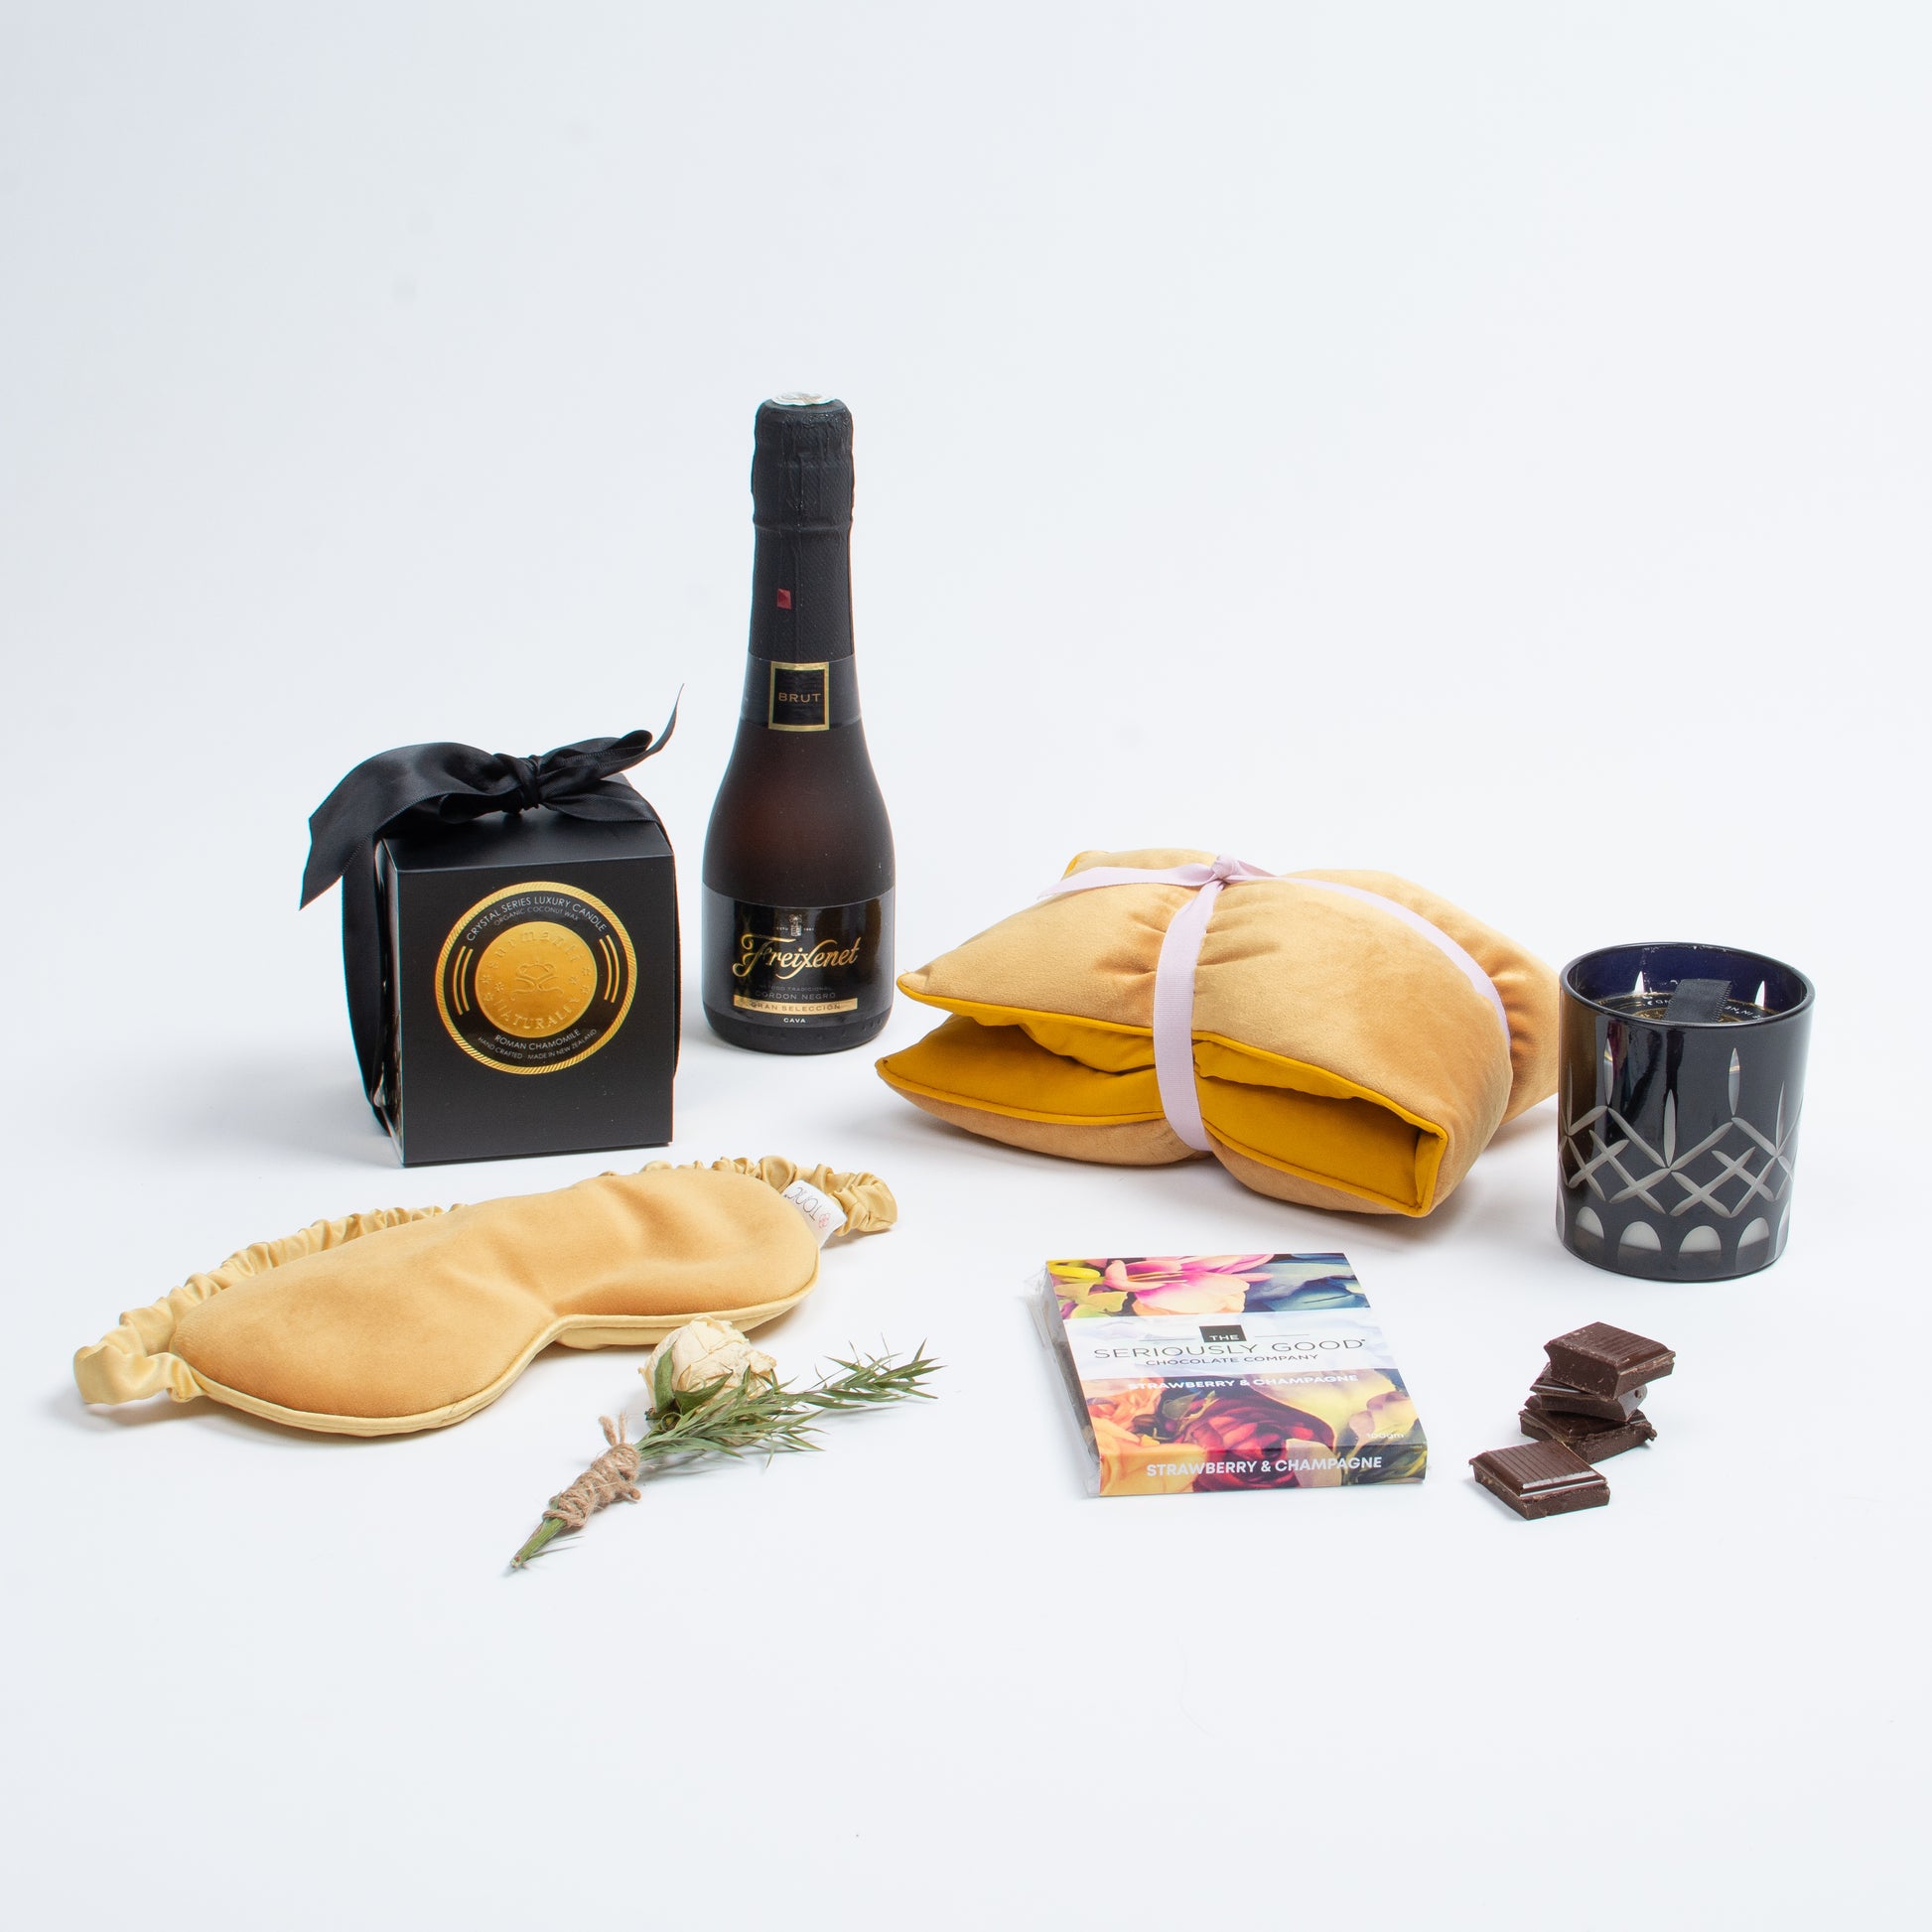 Products shown out of gift box are freixenet, heat wrap, eye mask, chocolate, scented candle.